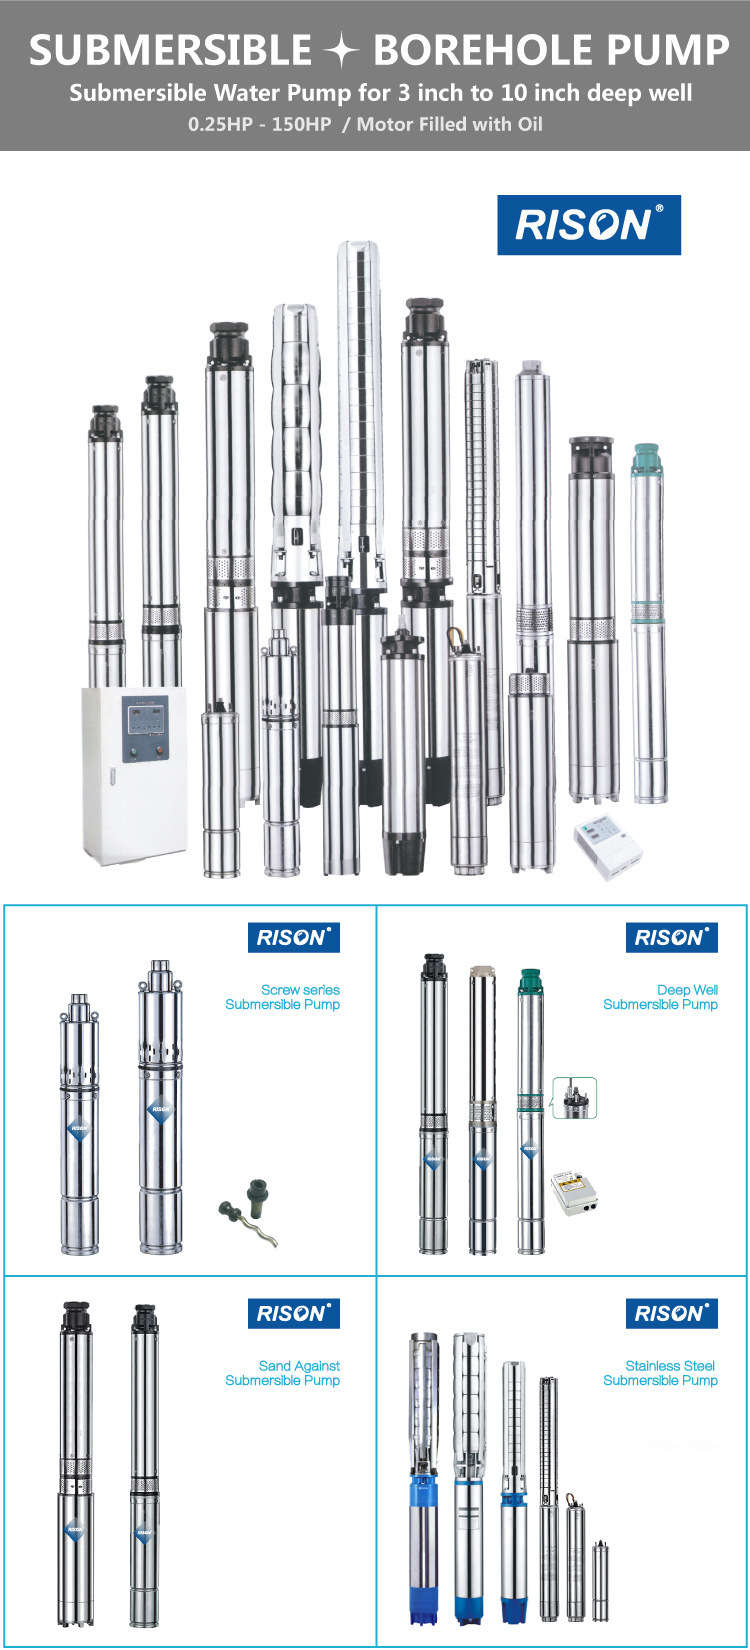 8sp77 Best Price Stainless Steel Electric Submersible Water Pump for 4 Inch Deep Well/Borehole